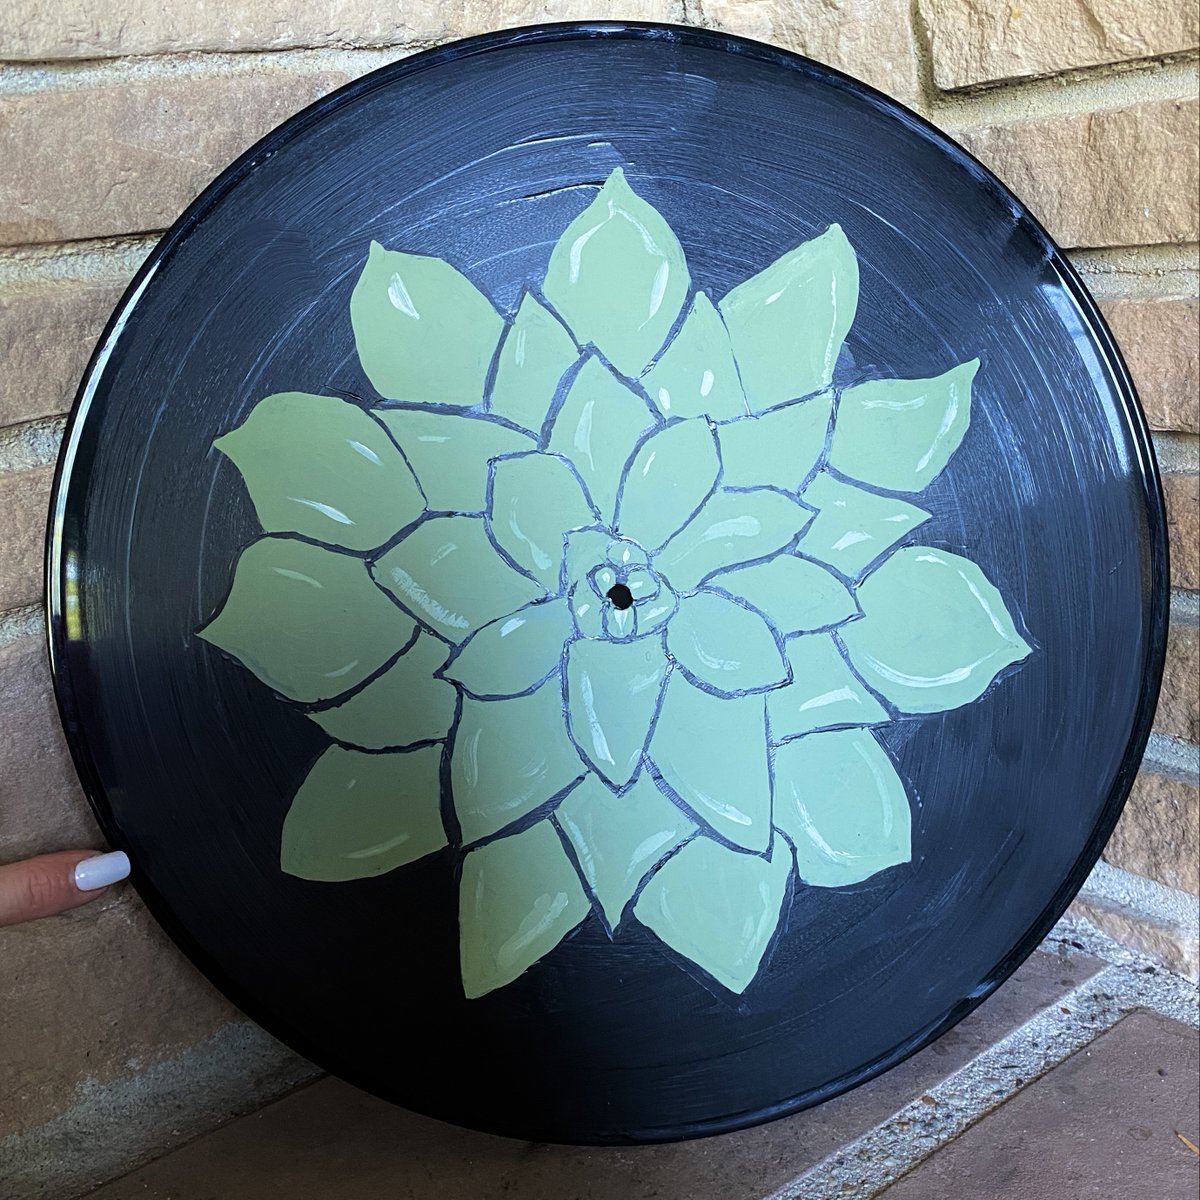 💚Here's what I painted the other night! A succulent using an old record as a canvas🤗 #Art #NatureArt #NatureLover #painting